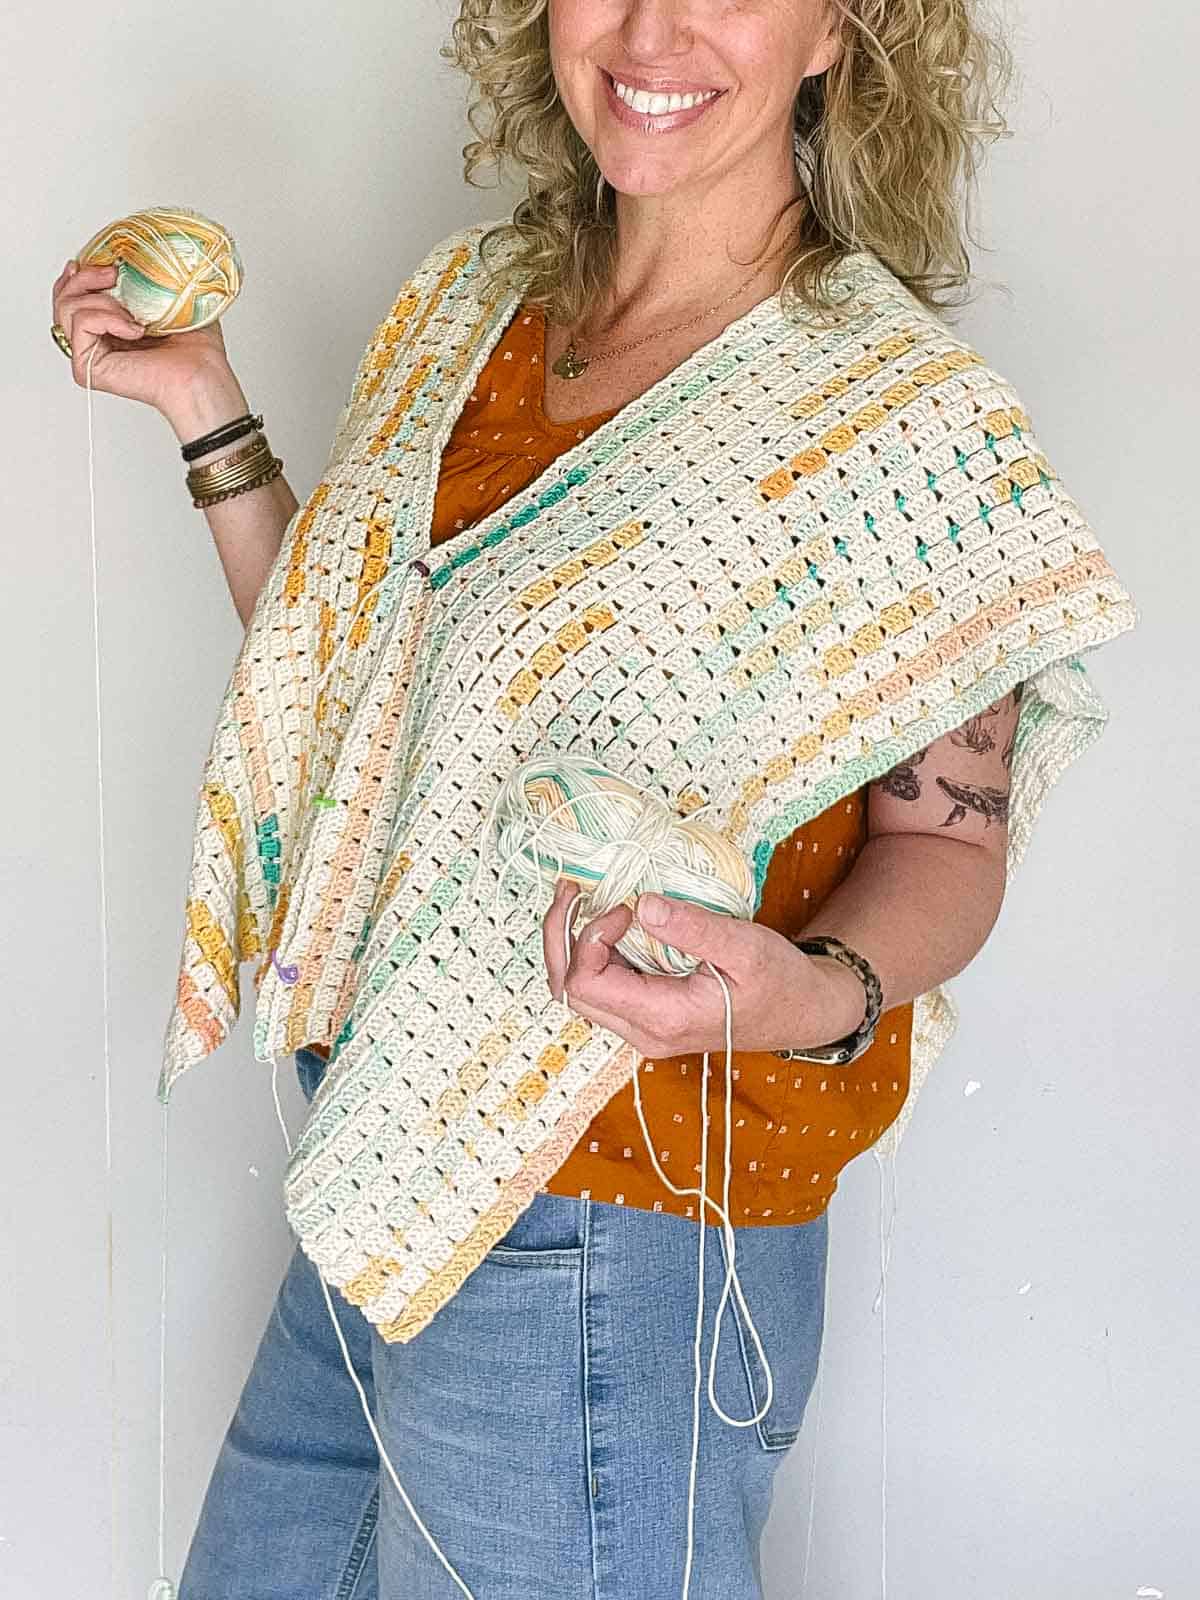 Jess Coppom wearing two crocheted rectangles that are pinned together to form a shirt.